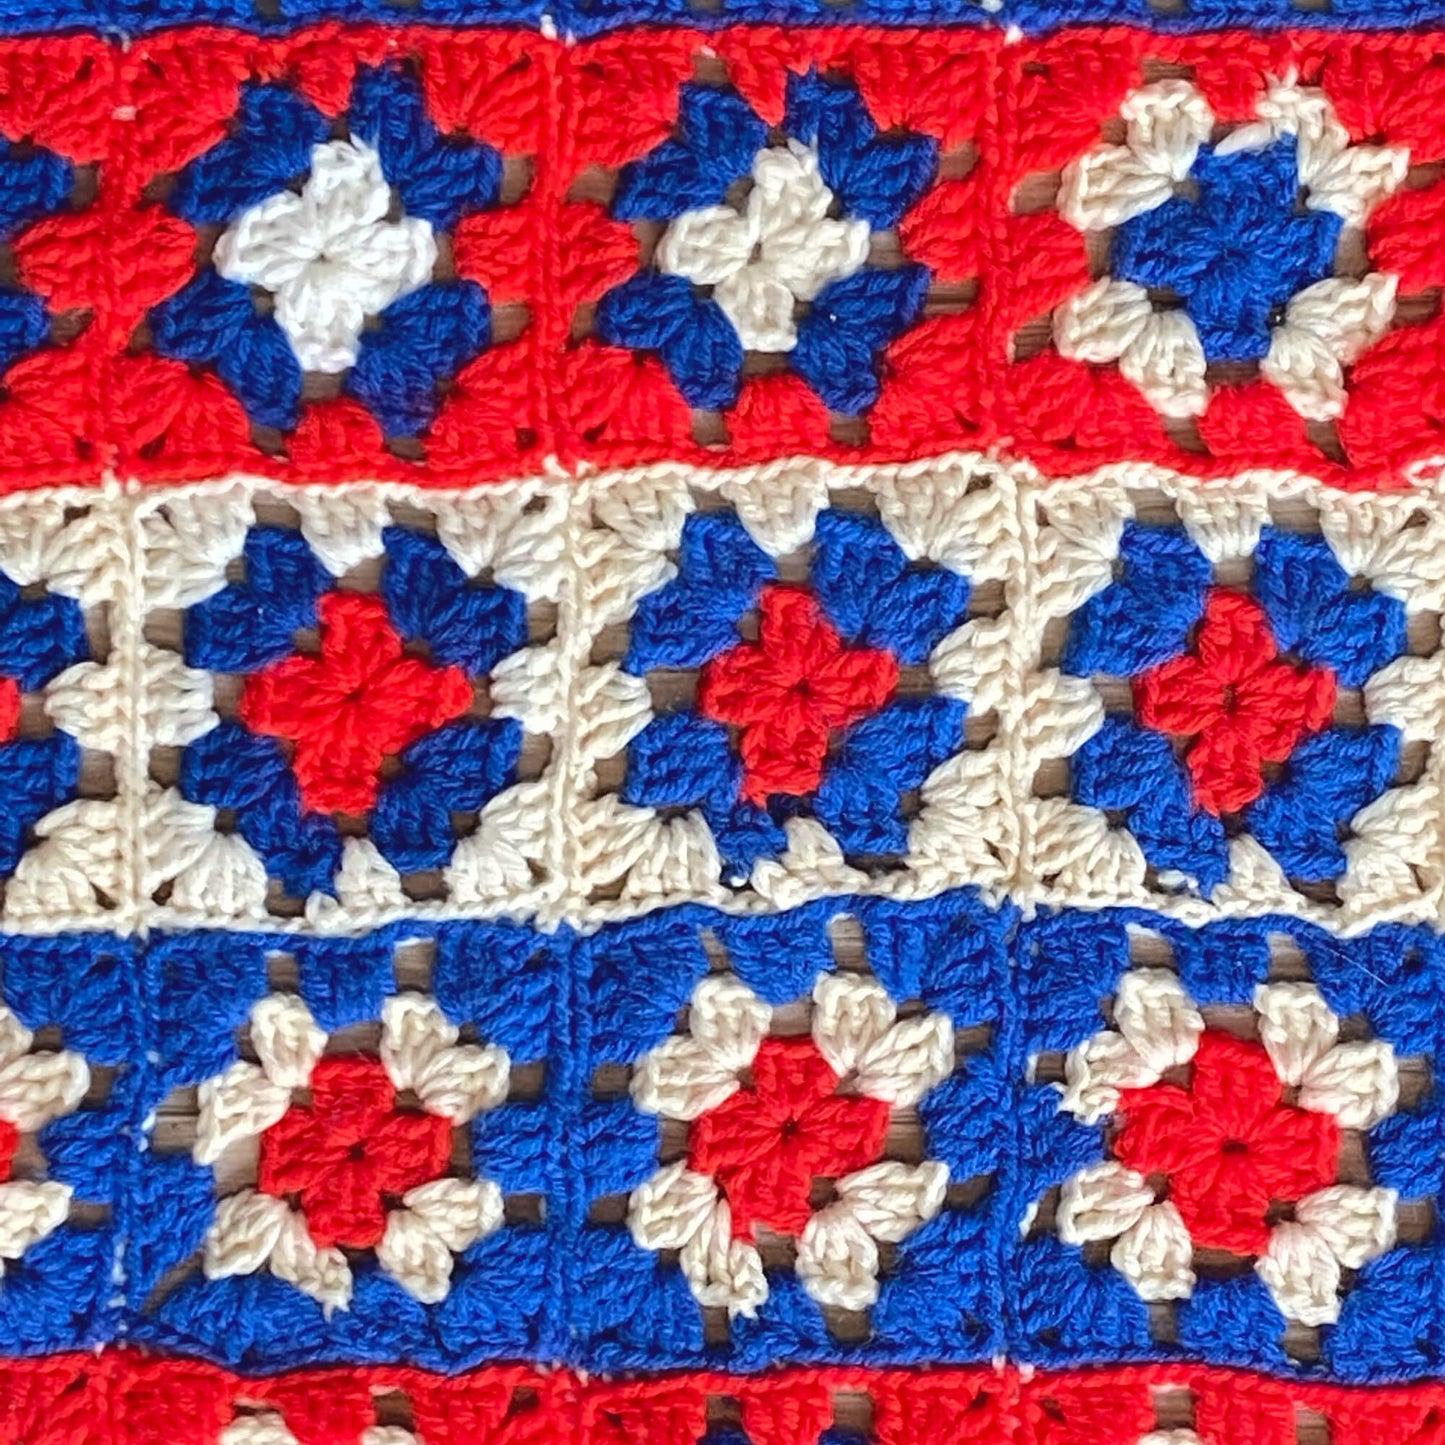 Red_White_Blue_Patriotic_CrochetBlanket_48x60_Handmade_Vintage_1970s, close-up-view.